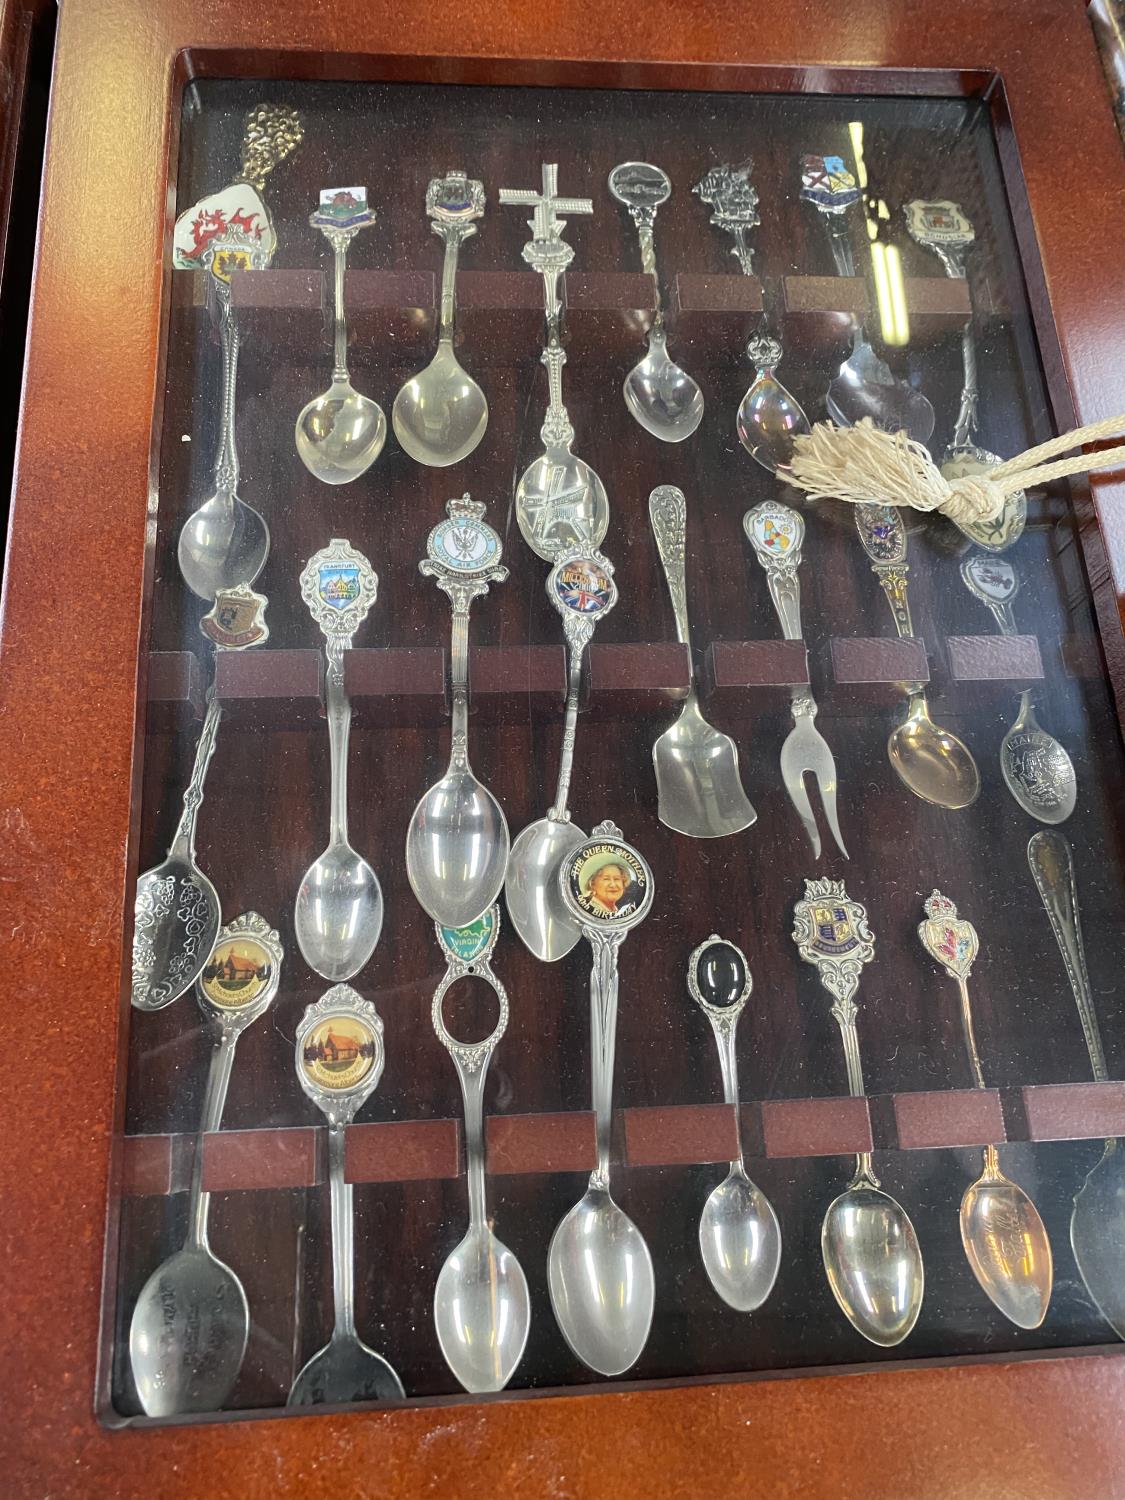 FOUR WOODEN DISPLAY CABINETS CONTAINING VARIOUS COLLECTABLE SPOONS TO INCLUDE PLACES, EVENTS ETC - Image 4 of 5